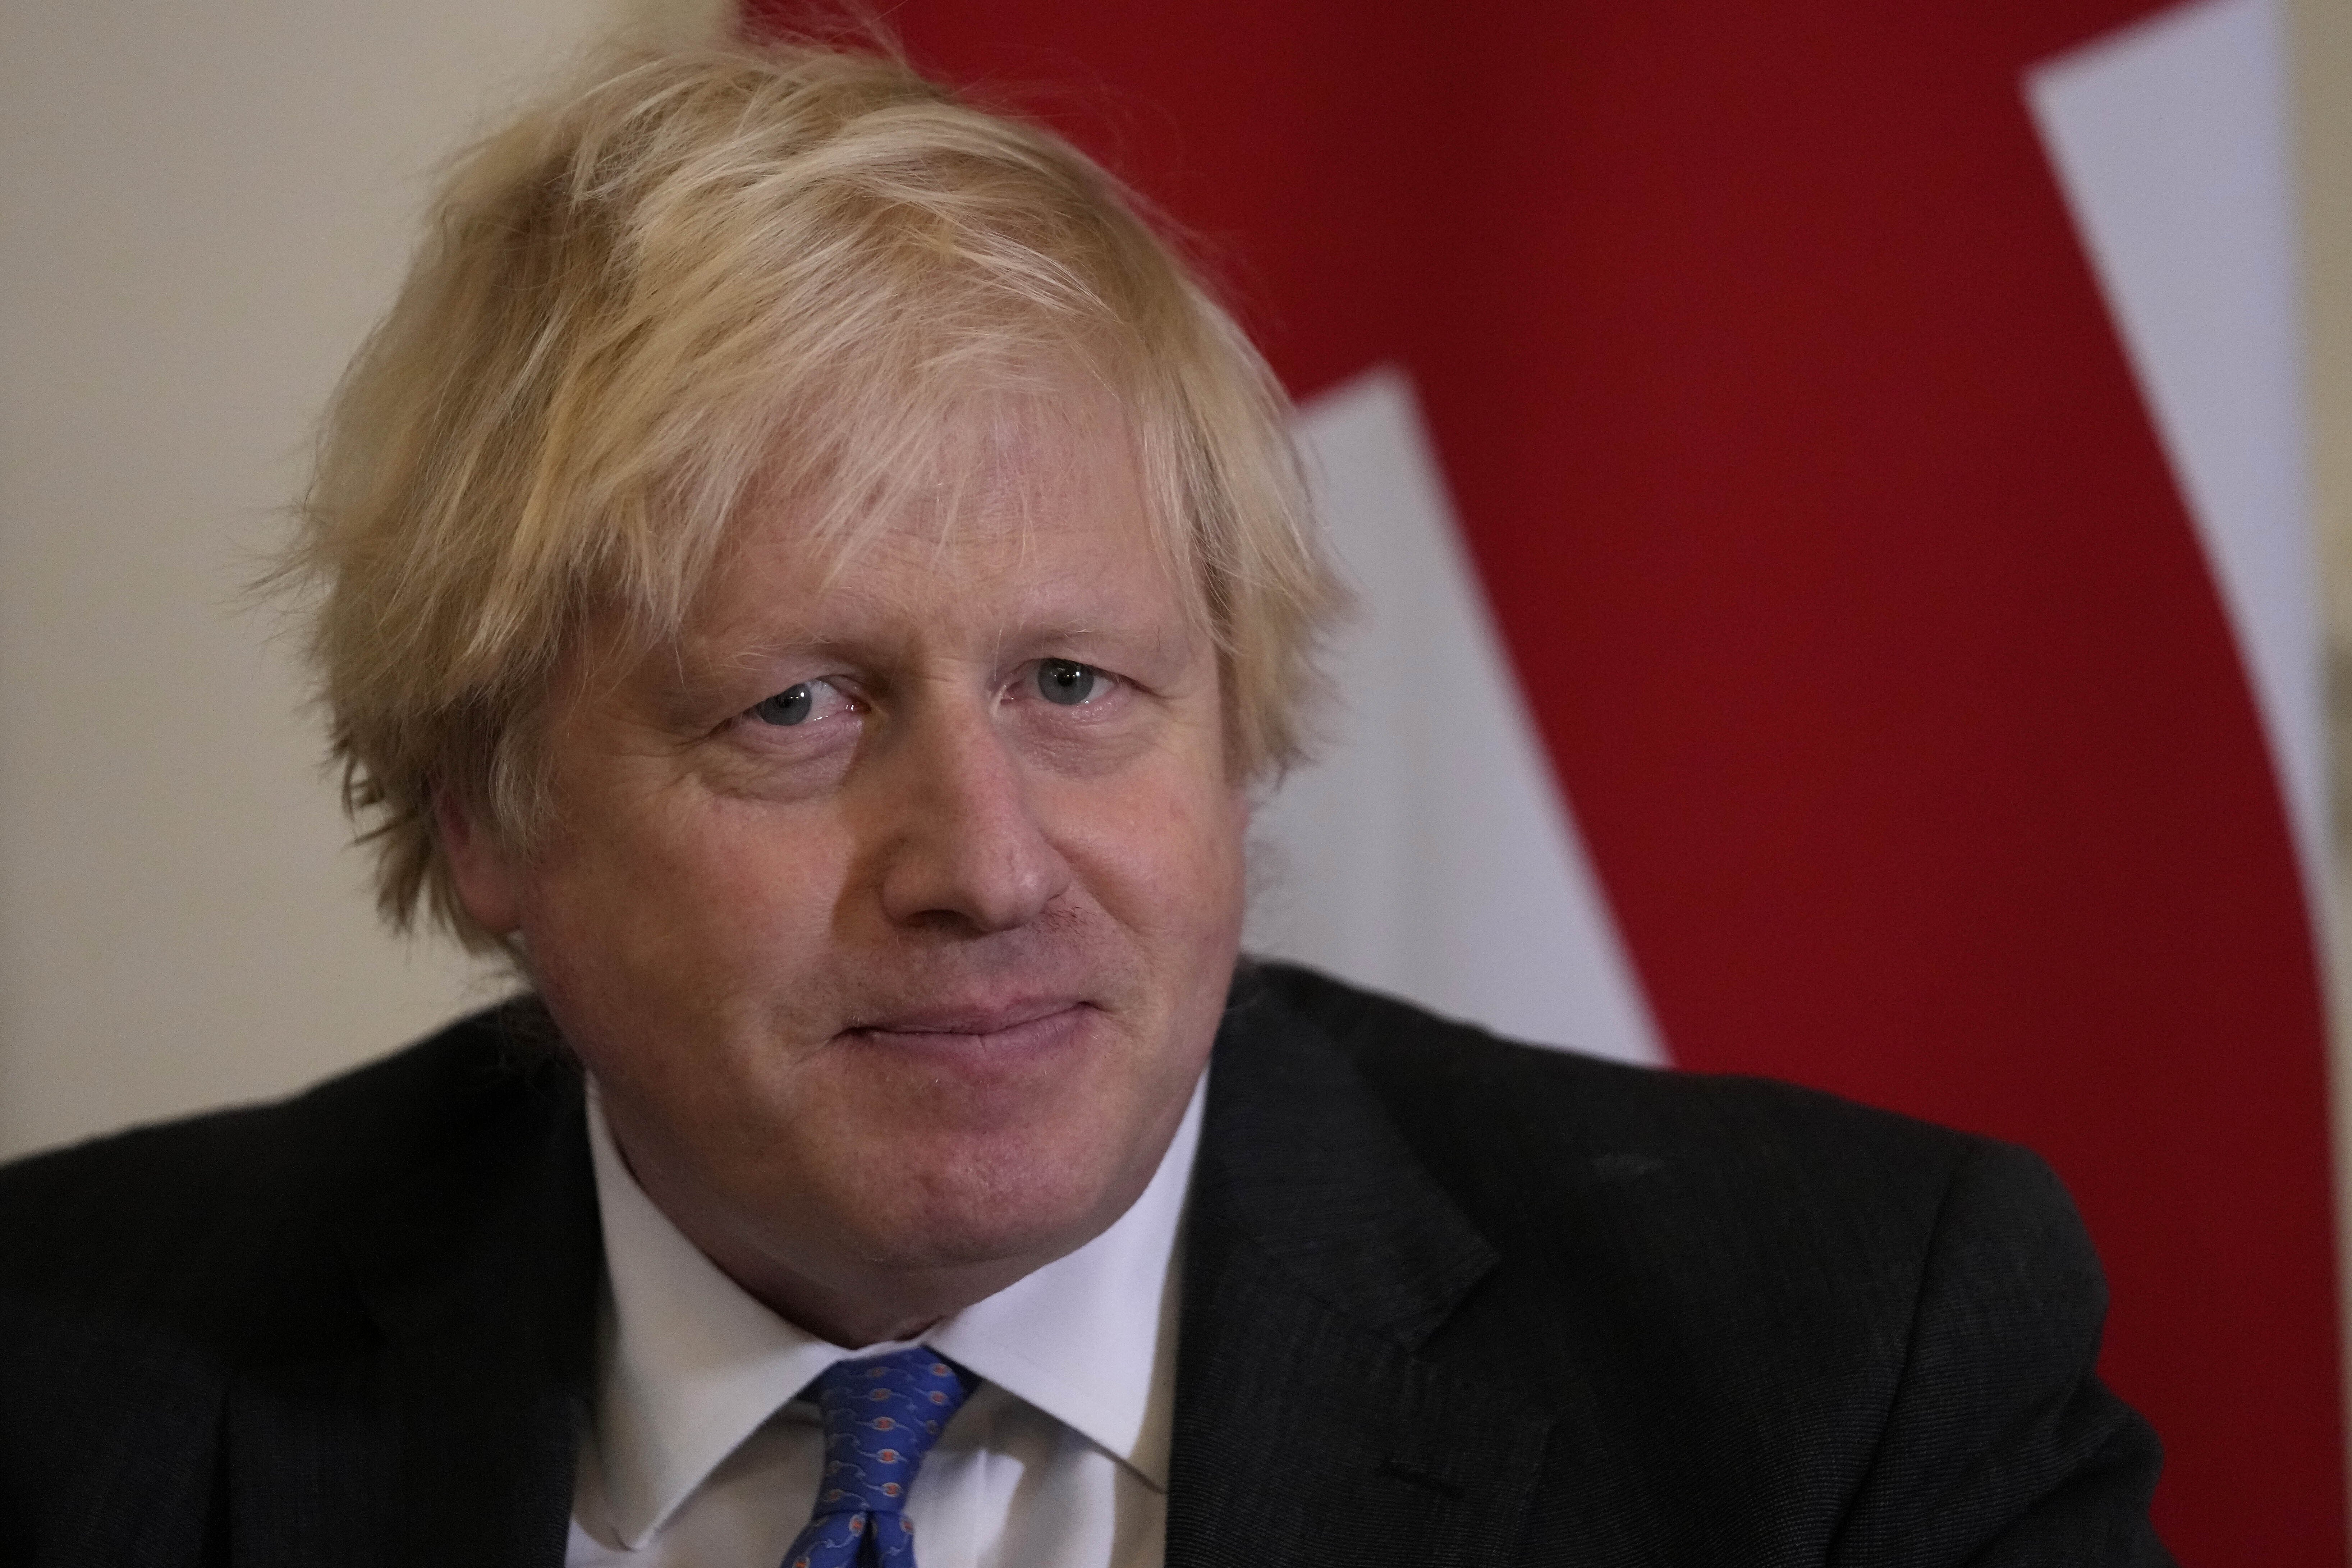 Prime minister Boris Johnson has urged people to get a booster jab in his Christmas message